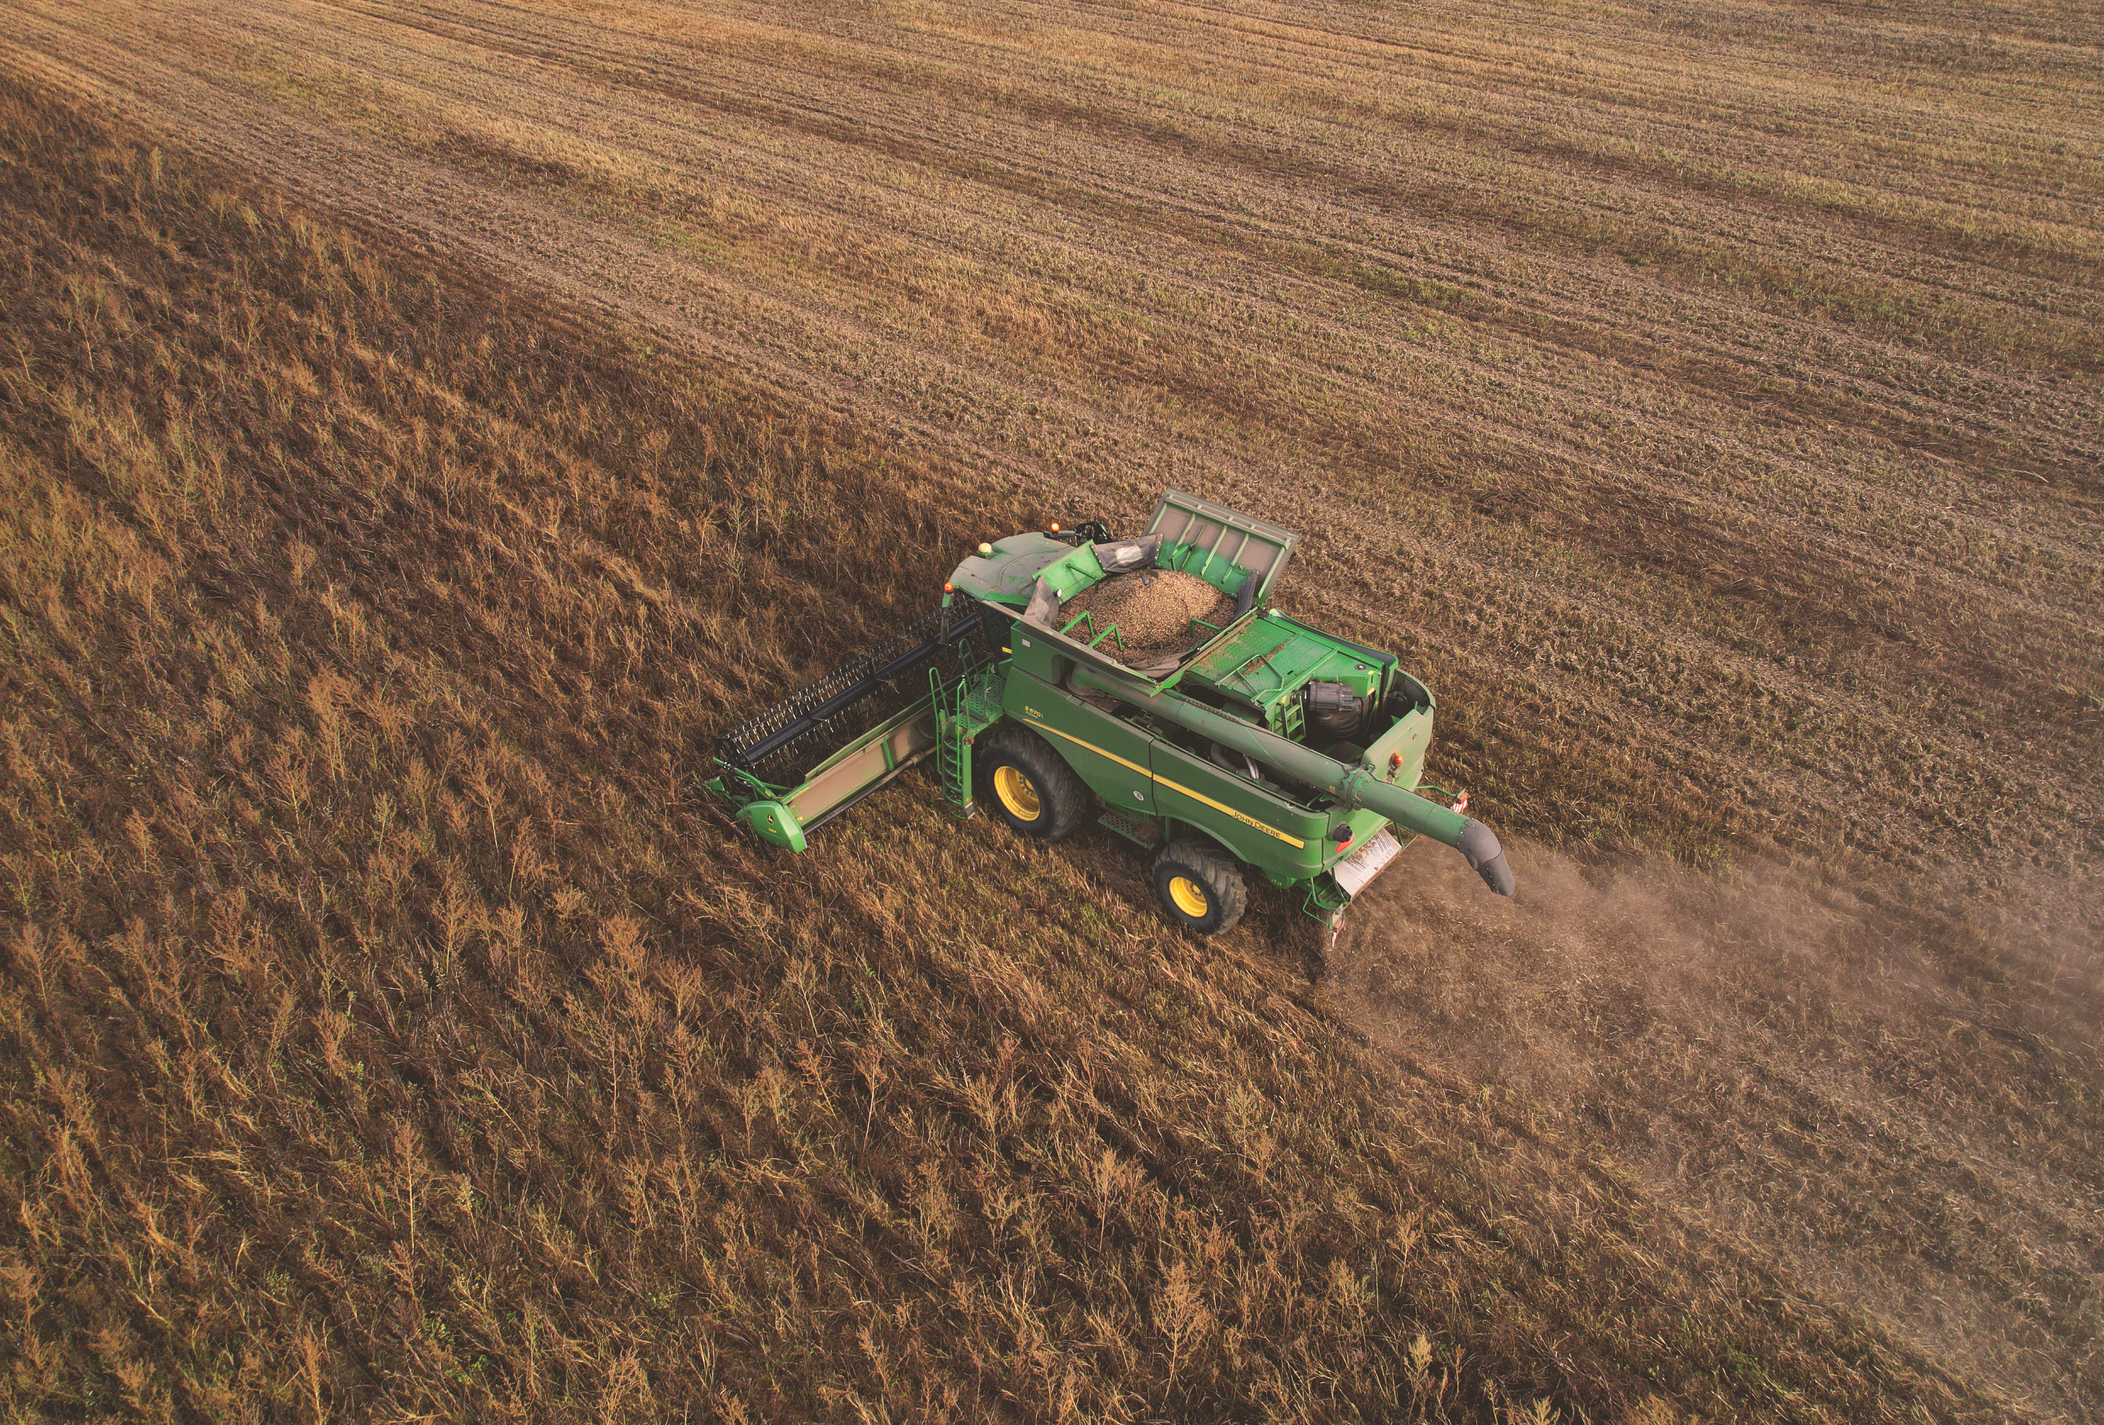 John Deere has partnered with SpaceX to bring Starlink SATCOM solutions to farmers in rural areas underserved by traditional internet services.